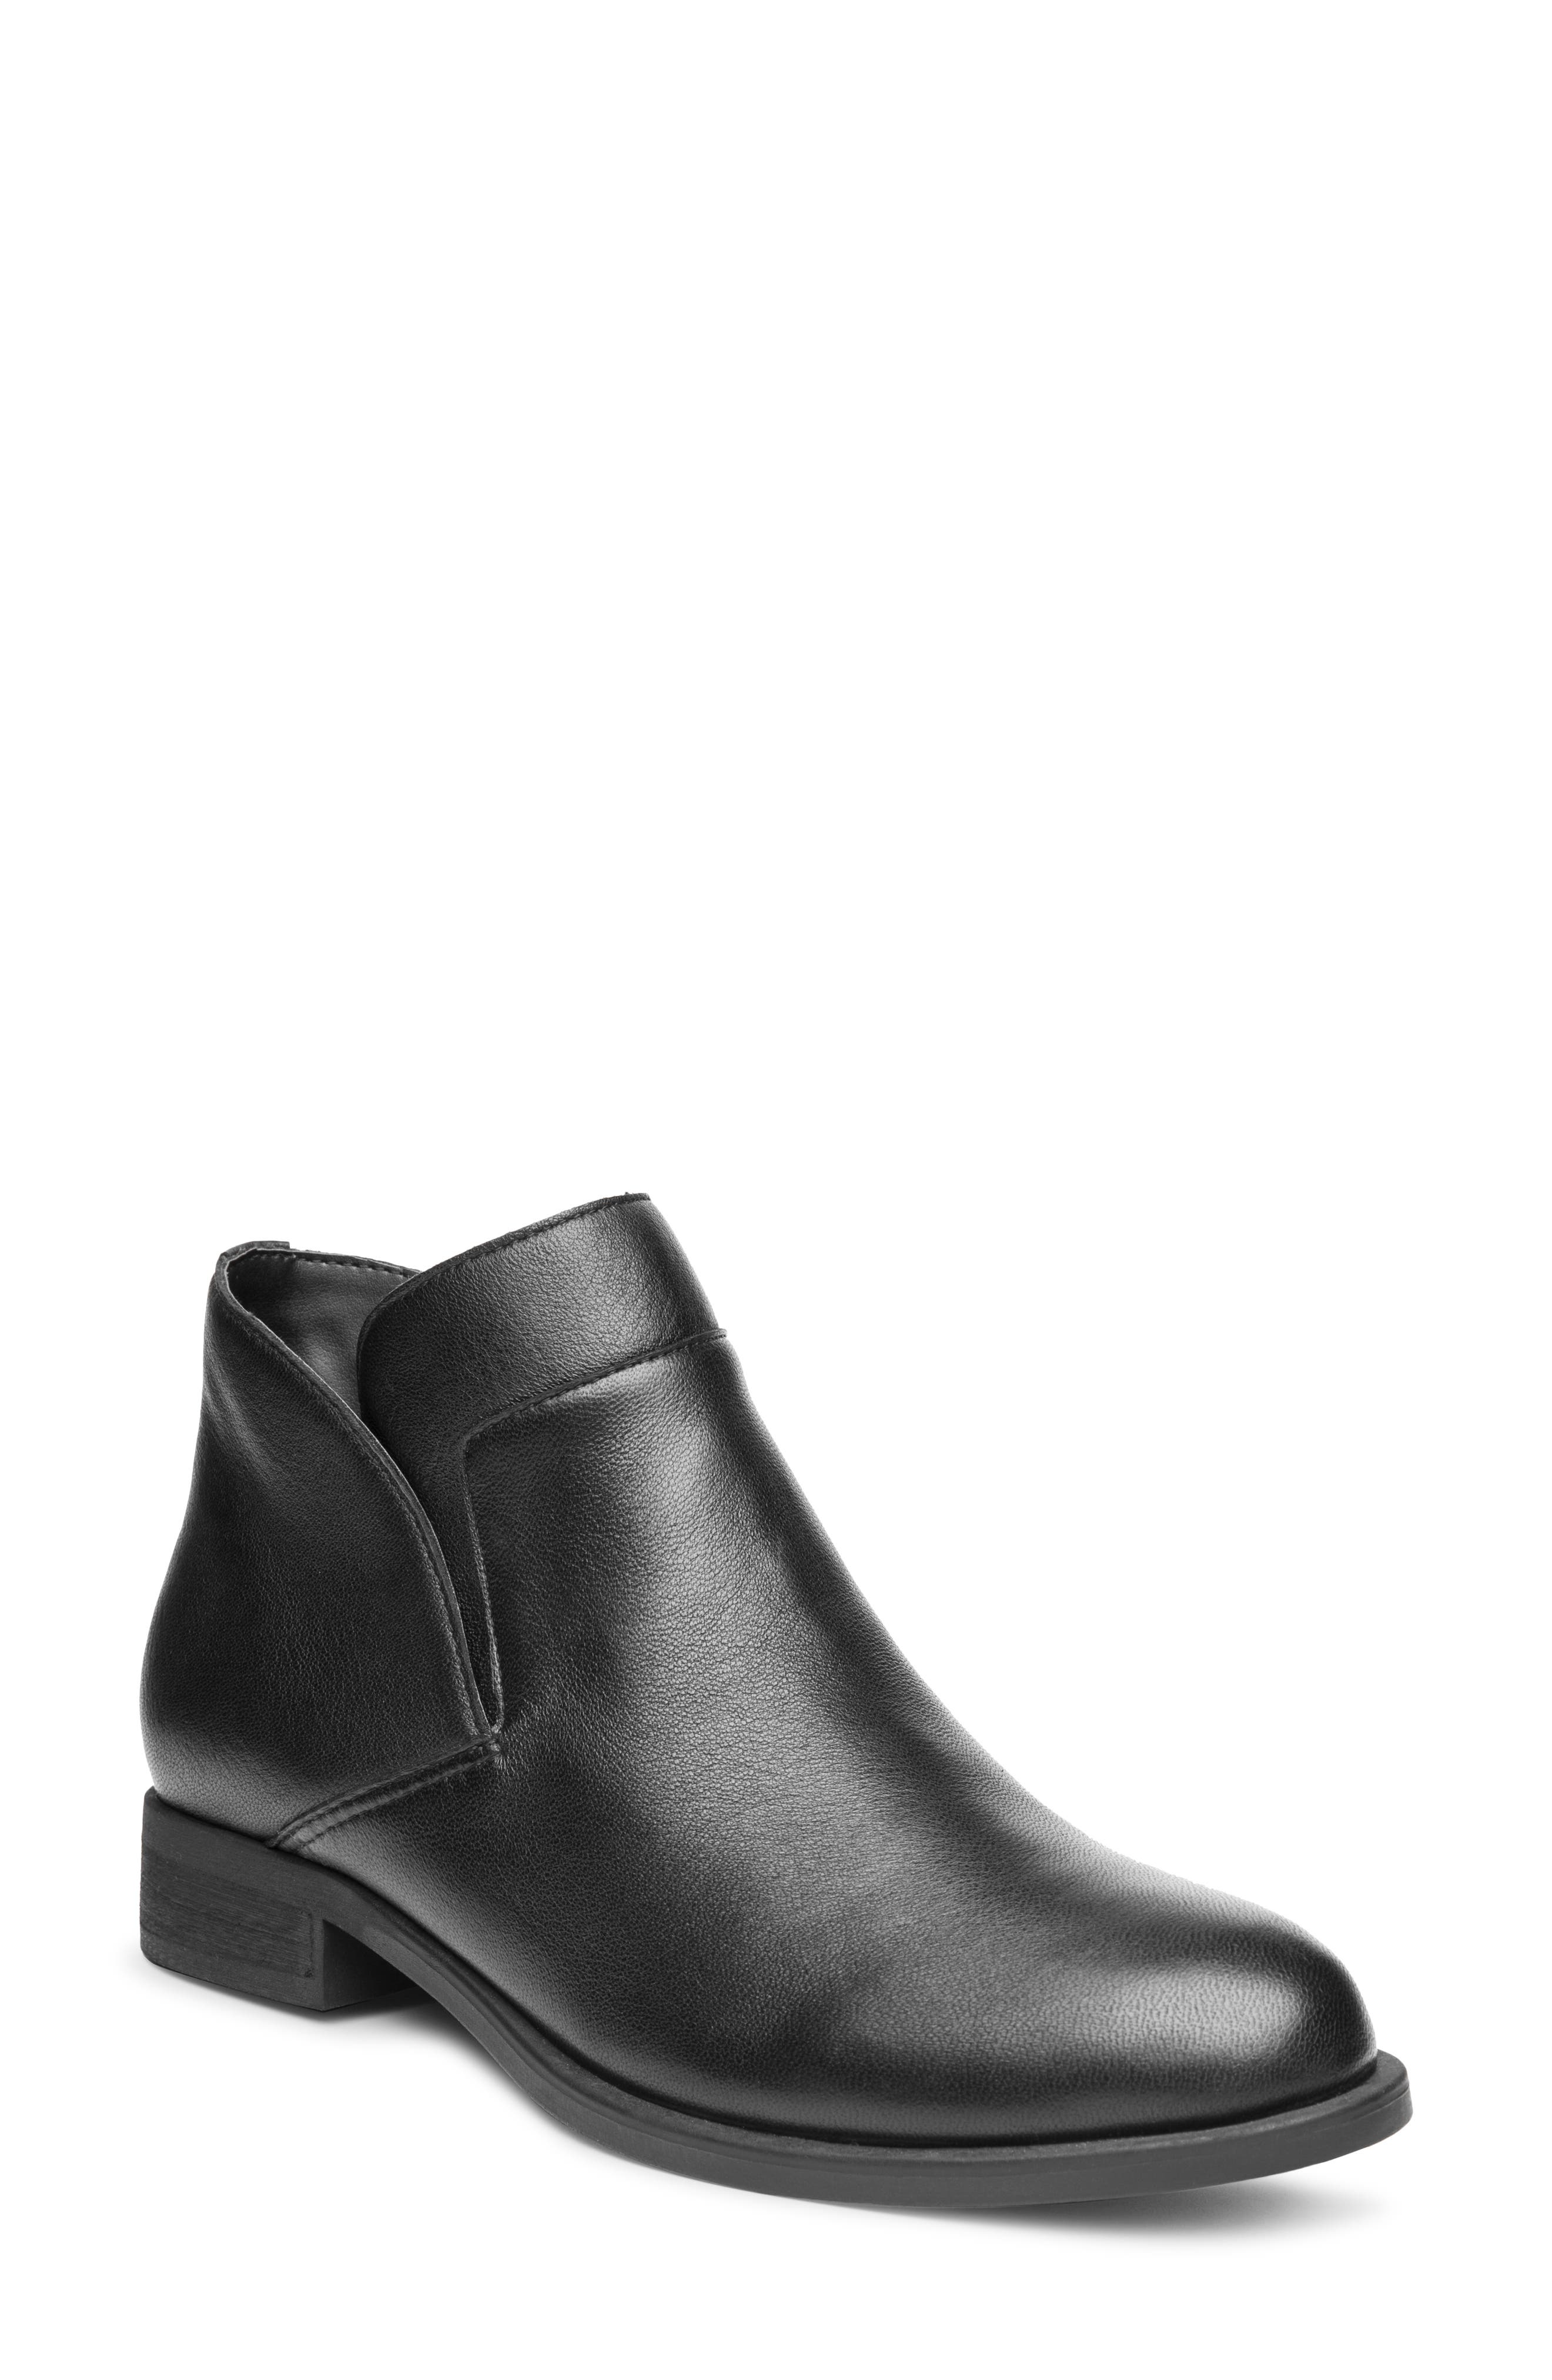 Women's Me Too Booties \u0026 Ankle Boots 